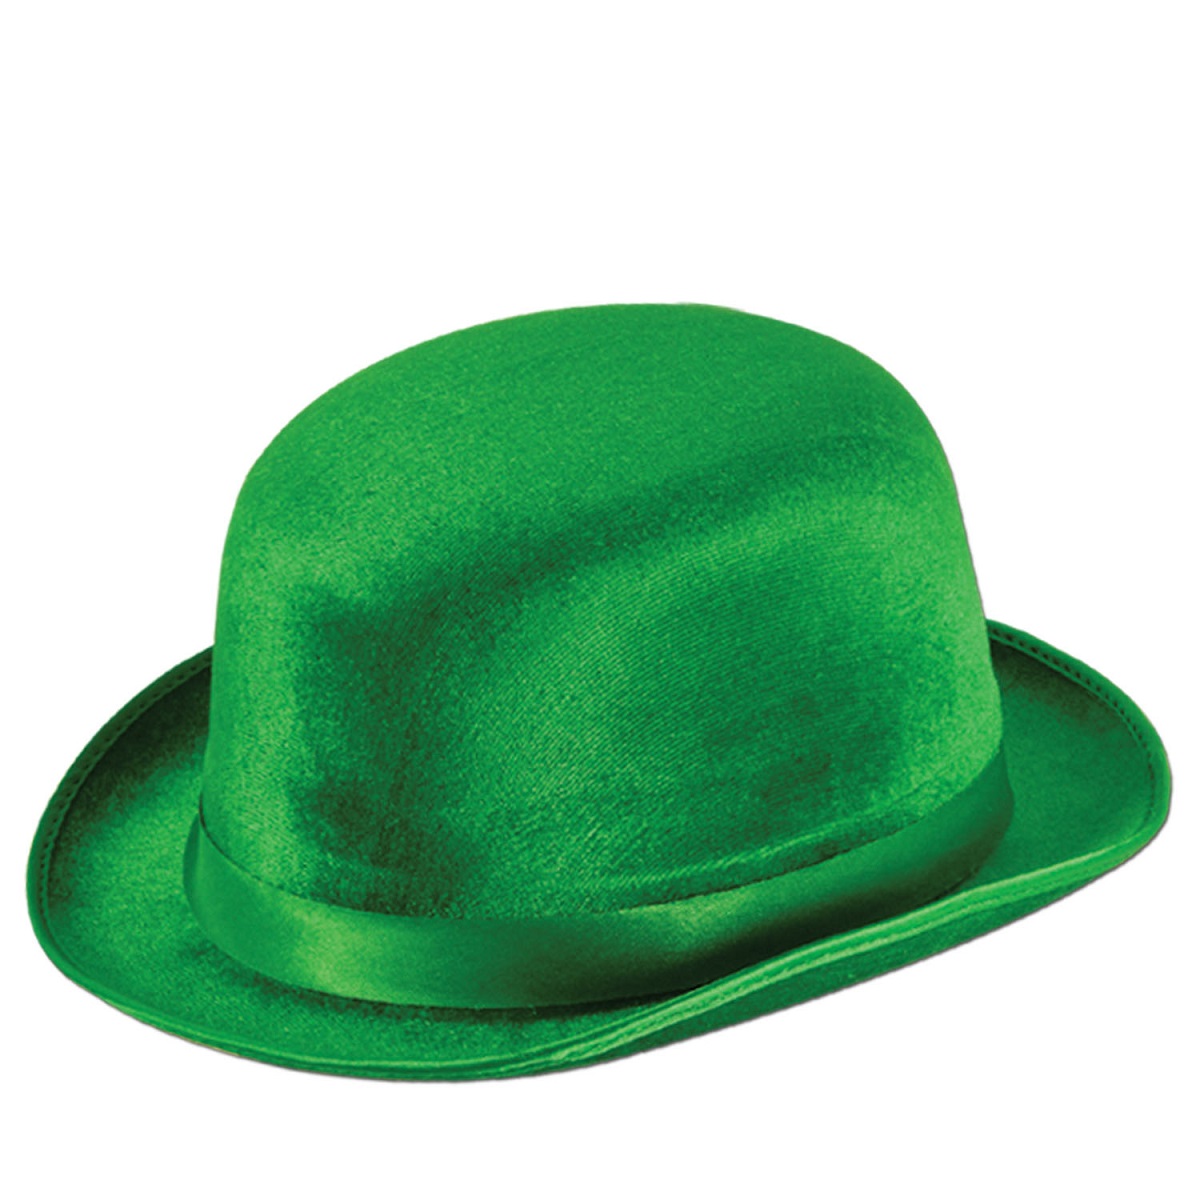 Beistle Club Pack of 12 Green Vel-Felt St. Patrick's Day Derby Hat - Adult Sized